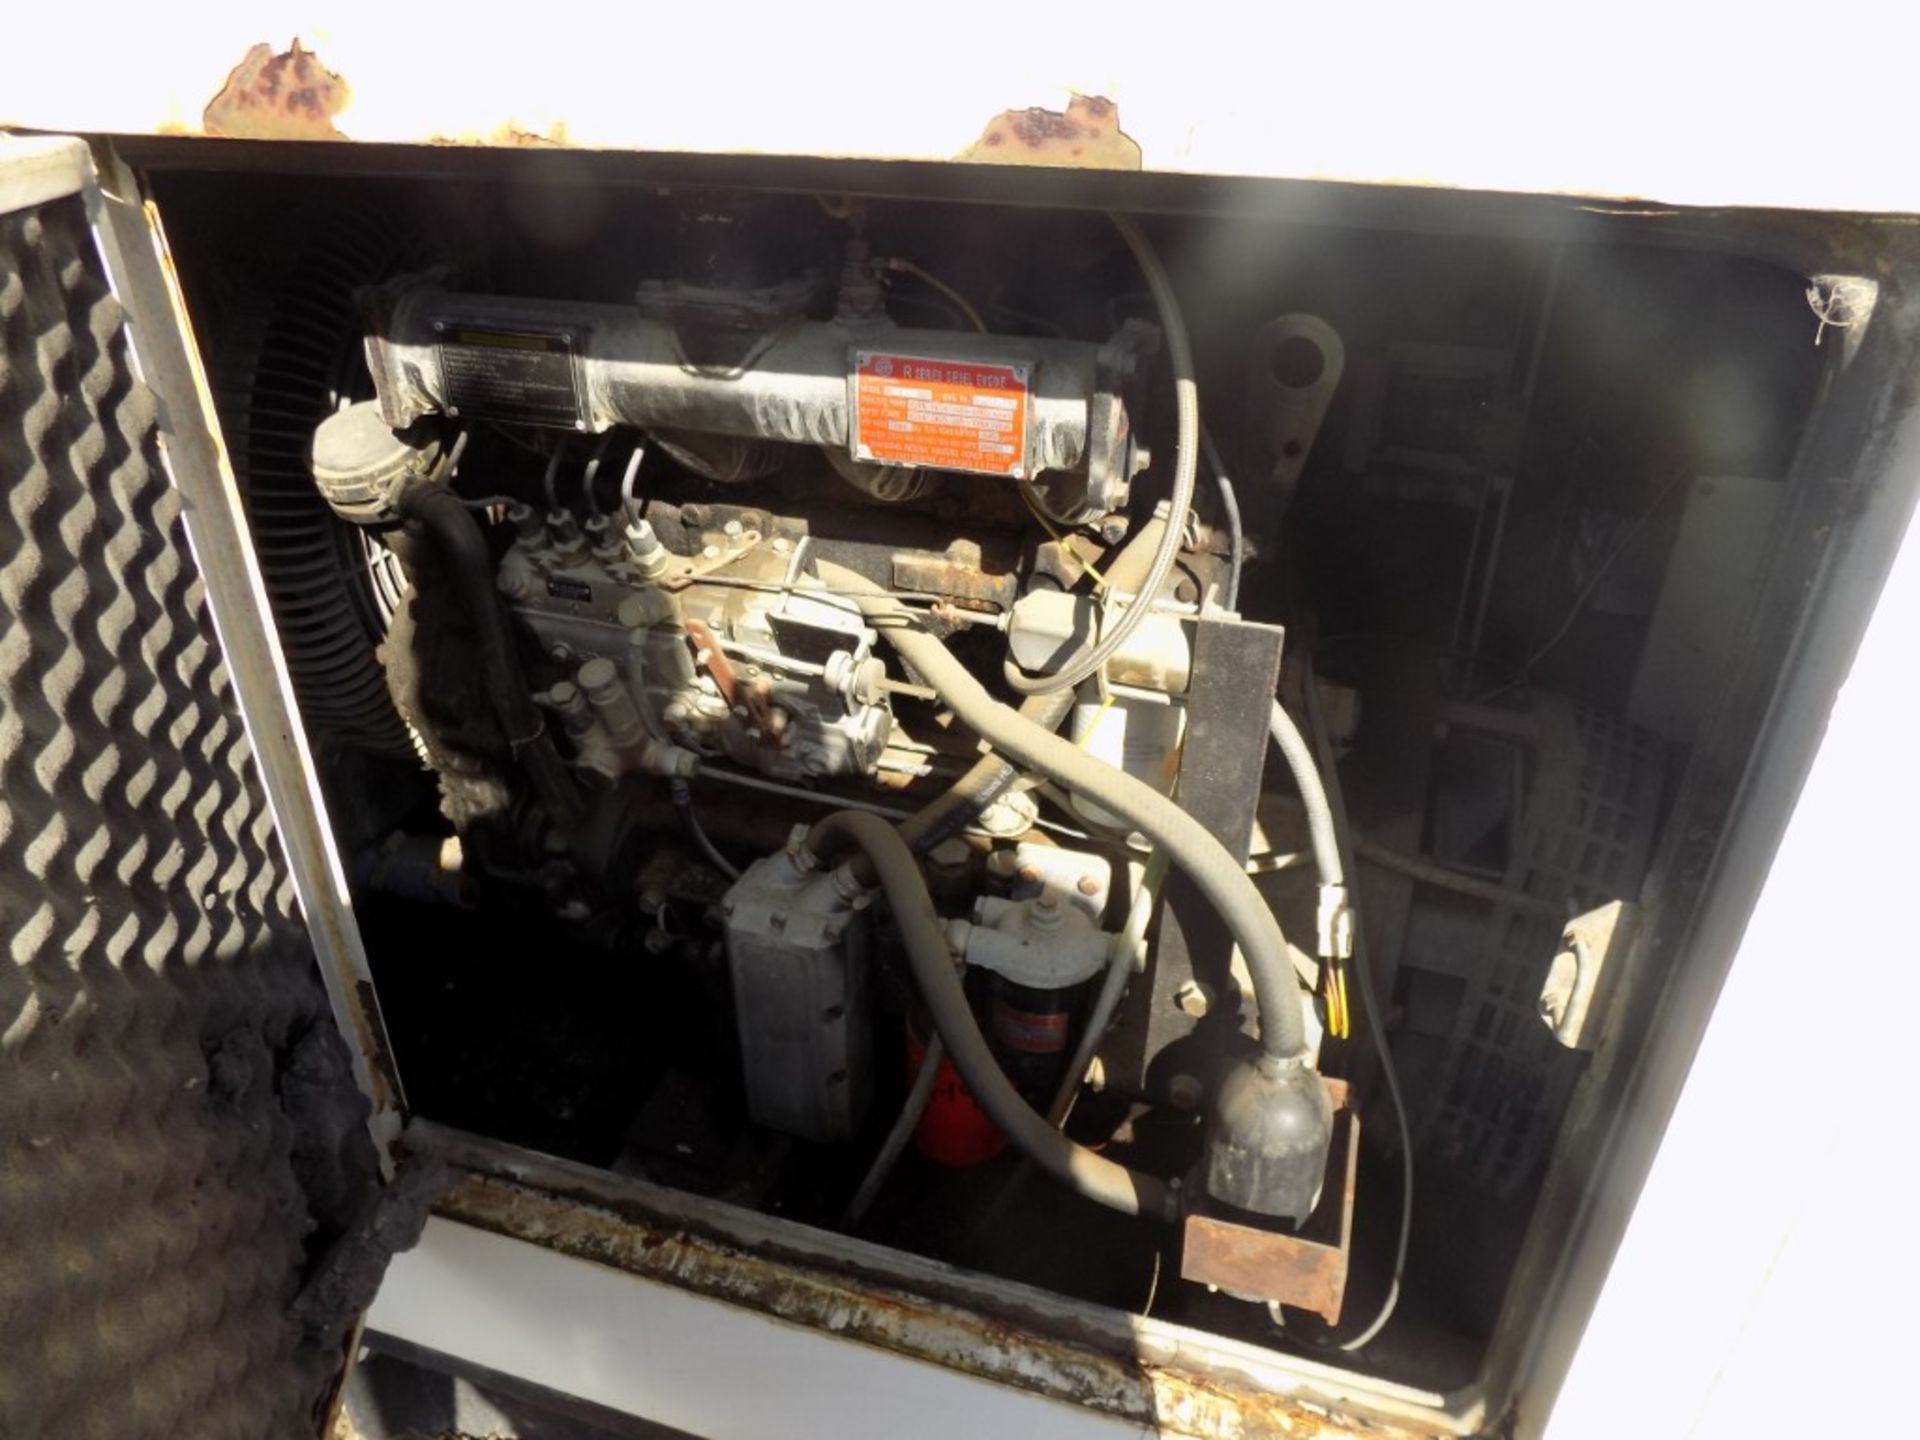 37KW Generator Set, w/4-Cyl Dsl Eng - NEEDS WORK - NOT WORKING - Image 4 of 4